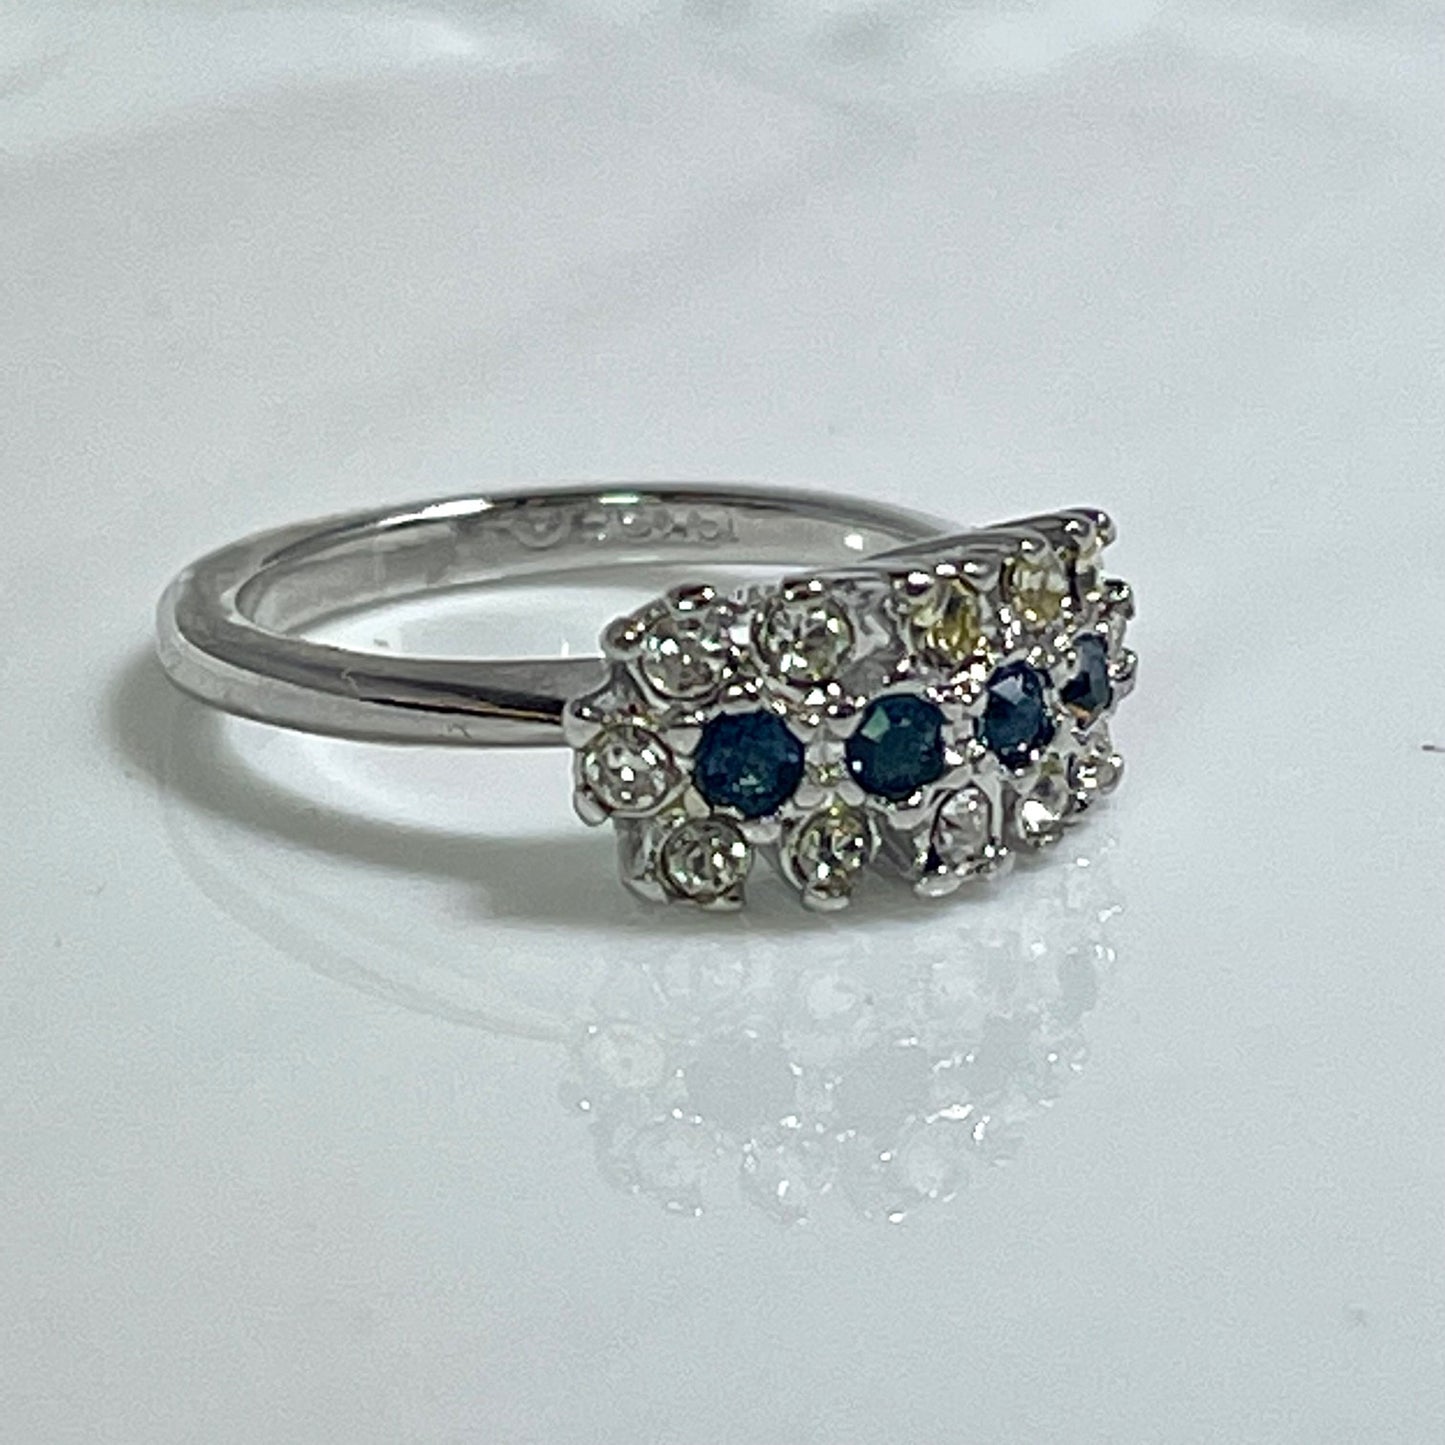 Vintage Ring Sapphire Clear Crystals Cluster 18k White Gold Silver Plated Victorian Style Womans Jewelry #R784